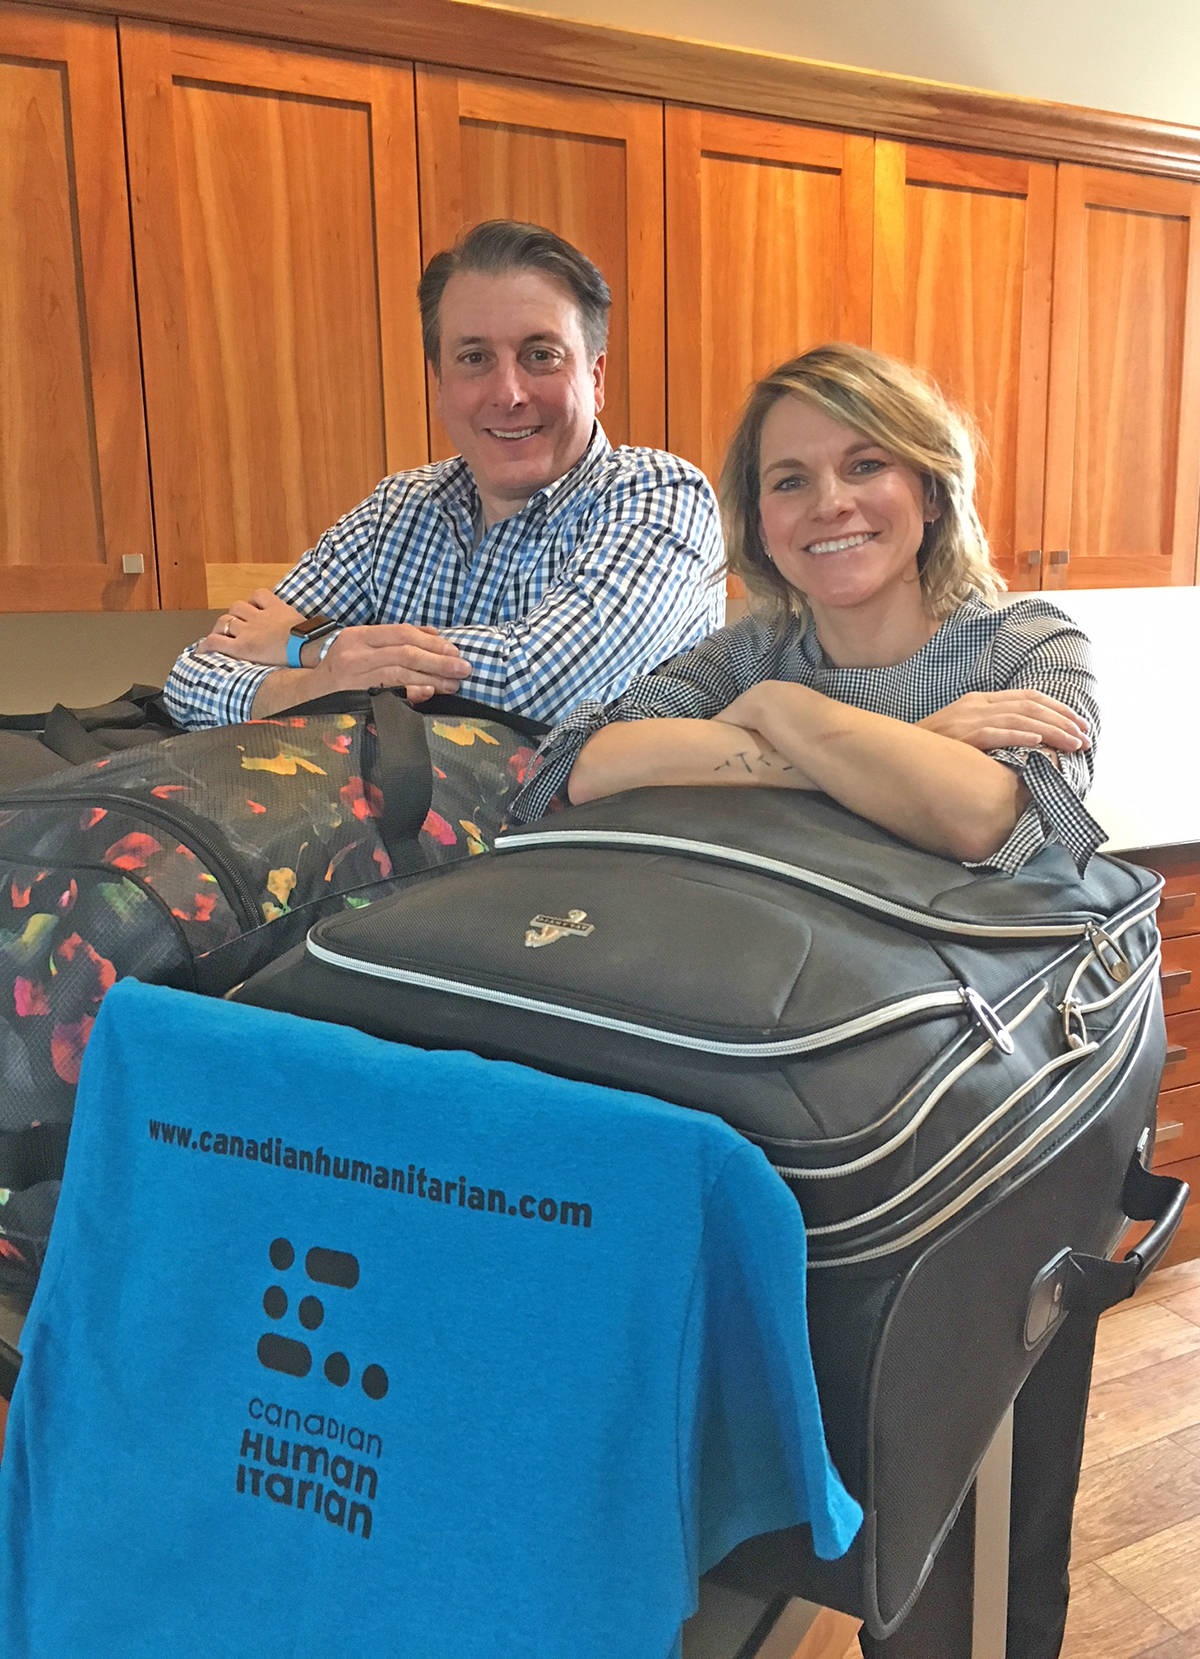 BIG ADVENTURE - Dr. Ivan Hucal, orthodontist and co-owner of Hucal Edwards Orthodontics and Melanie Bott, registered dental assistant headed to Ethiopia Feb. 16th to provide dental services to those in need. photo submitted